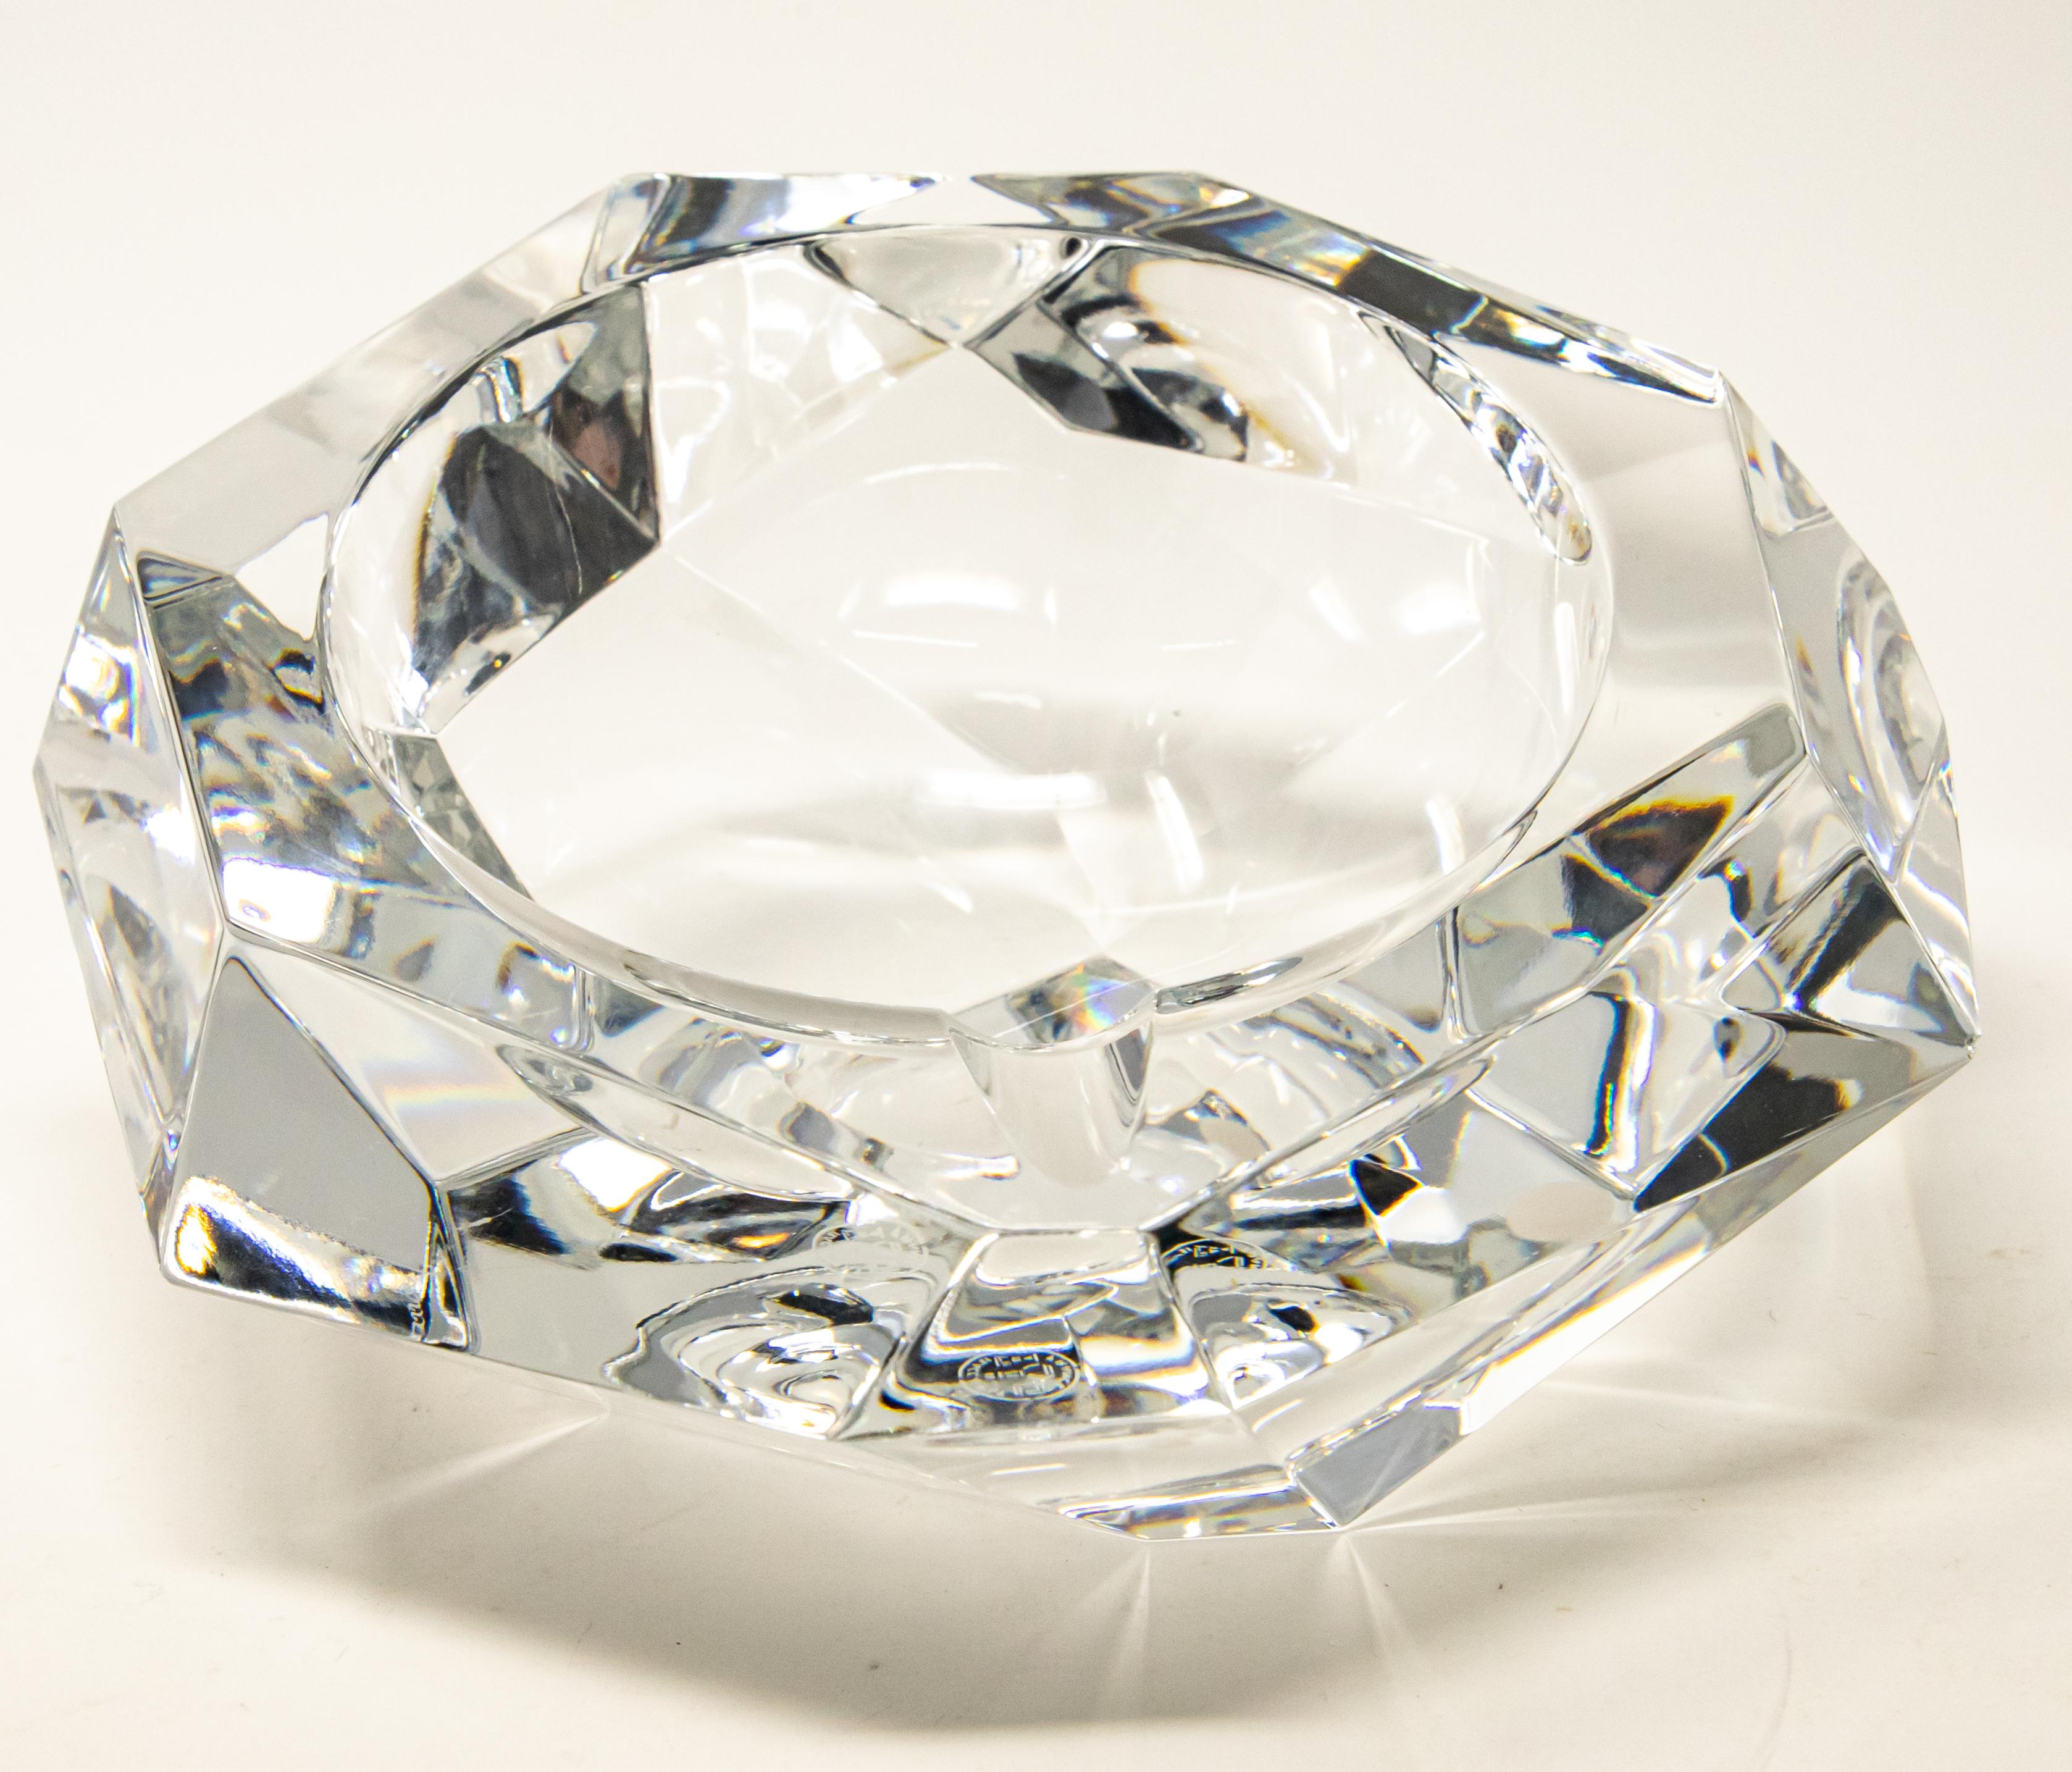 Offering this gorgeous crystal ashtray by Baccarat. Cut on many different angles this one shines and dazzles. Marked on the bottom Baccarat.